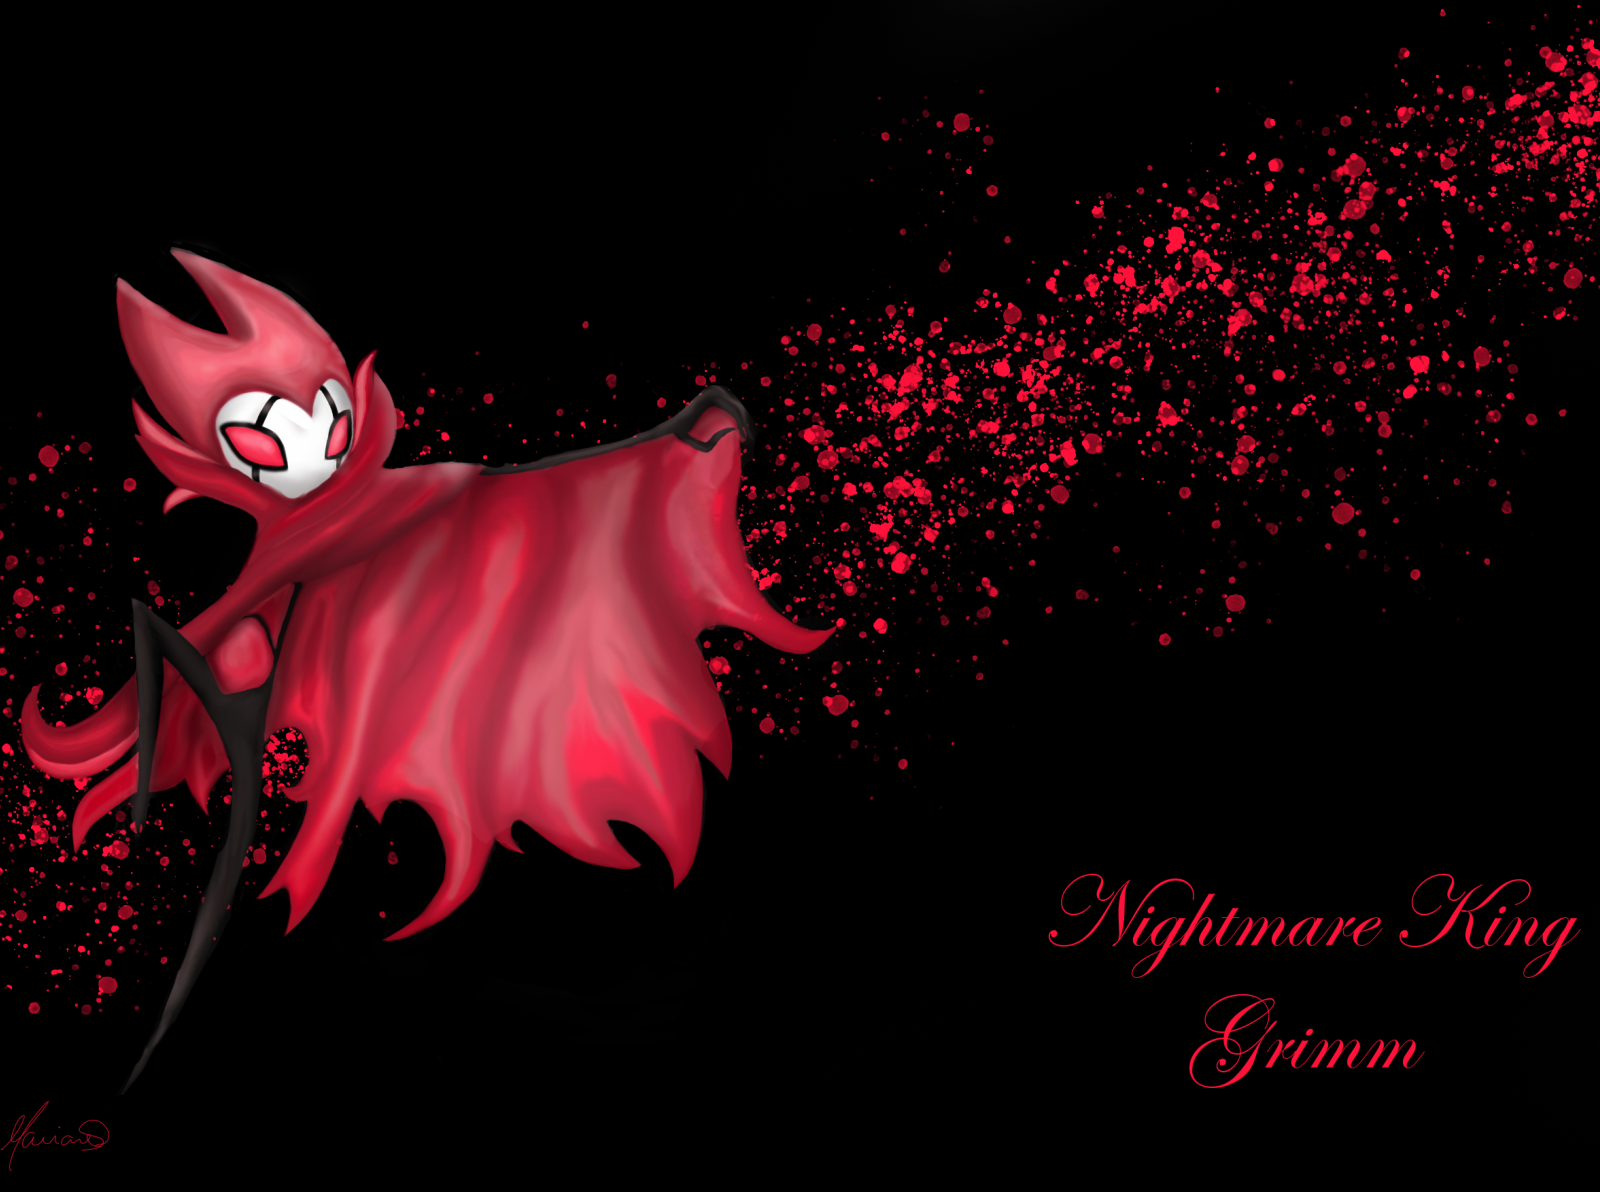 Nightmare King Grimm - Hollow Knight by Mariane Schnneider on Dribbble